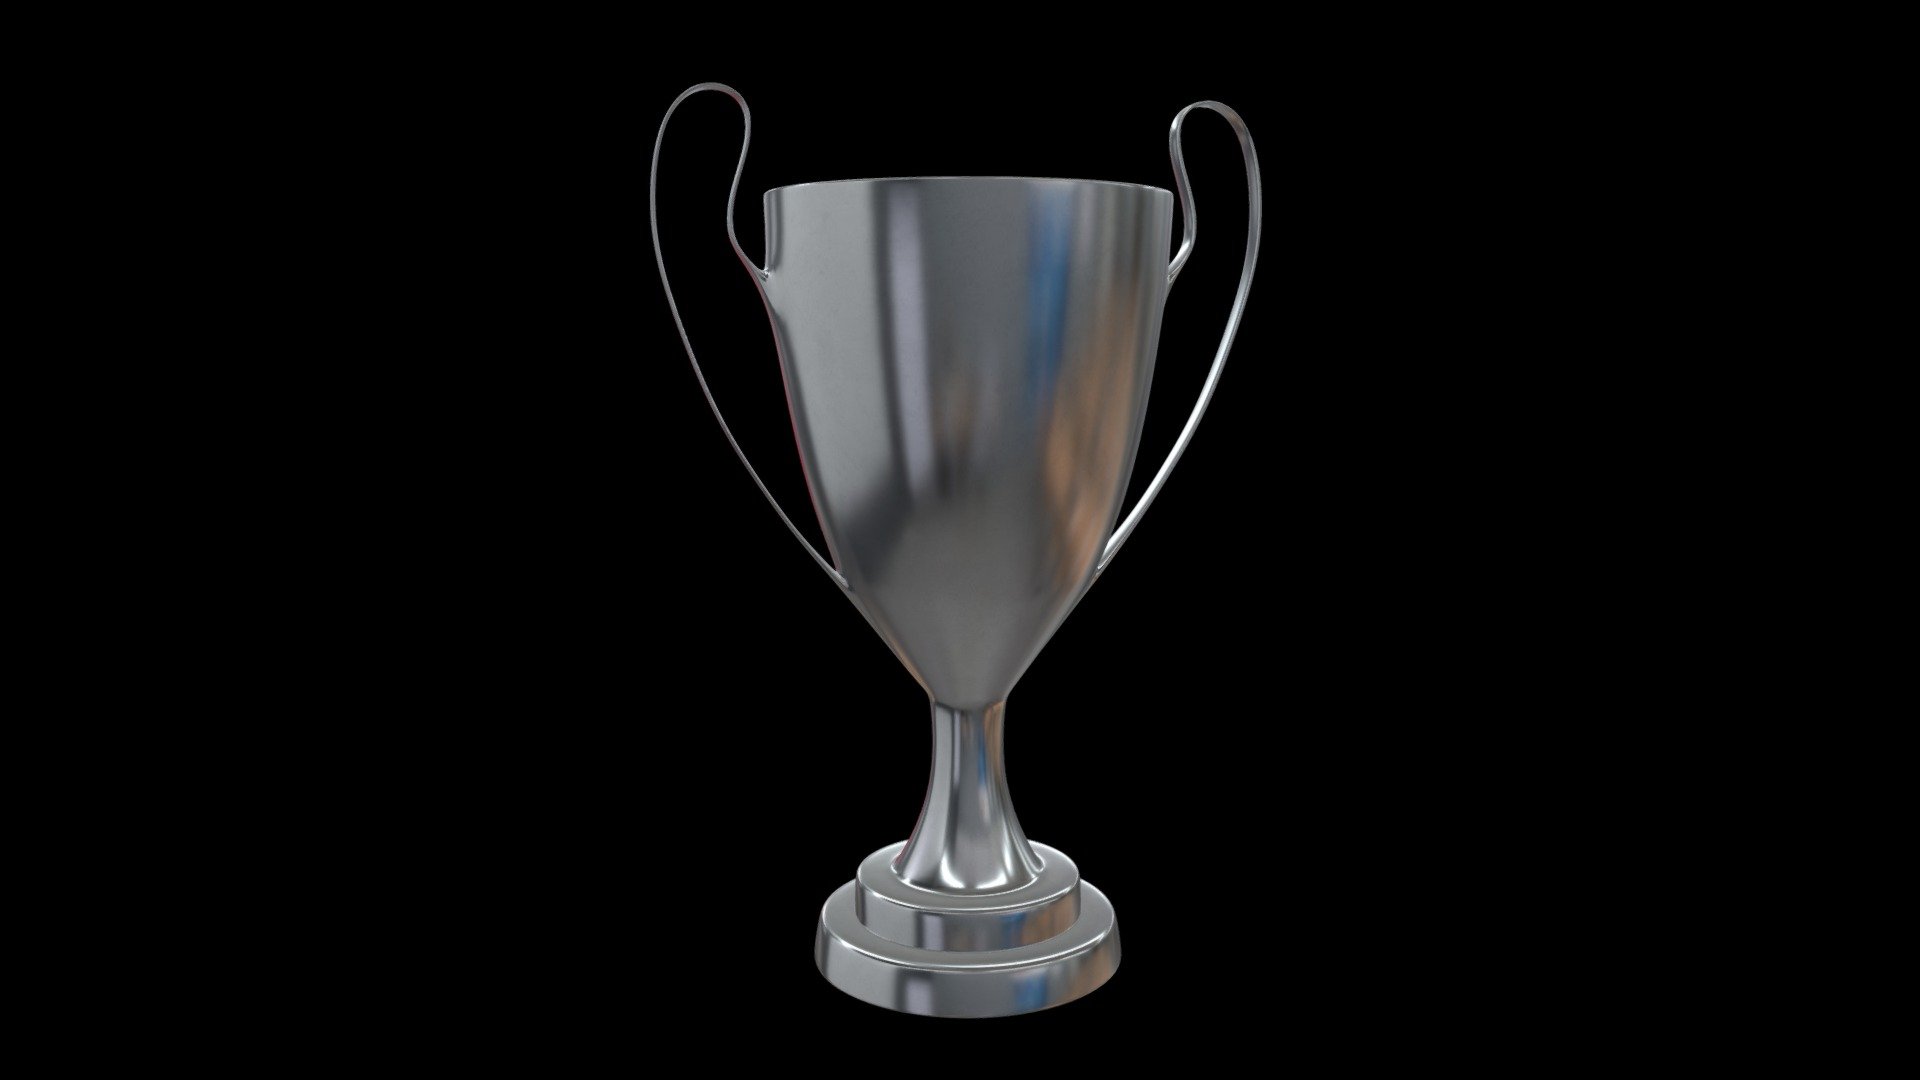 === The following description refers to the additional ZIP package provided with this model ===

Trophy cup 3D Model, nr. 3 in my collection. Production-ready 3D Model, with PBR materials, textures, non overlapping UV Layout map provided in the package.

Quads only geometries (no tris/ngons).

Formats included: FBX, OBJ; scenes: BLEND (with Cycles / Eevee PBR Materials and Textures); other: png with Alpha.

1 Object (mesh), 1 PBR Material, UV unwrapped (non overlapping UV Layout map provided in the package); UV-mapped Textures.

UV Layout maps and Image Textures resolutions: 2048x2048; PBR Textures made with Substance Painter.

Polygonal, QUADS ONLY (no tris/ngons); 16898 vertices, 16900 quad faces (33800 tris).

Real world dimensions; scene scale units: cm in Blender 3.1 (that is: Metric with 0.01 scale).

Uniform scale object (scale applied in Blender 3.1) 3d model